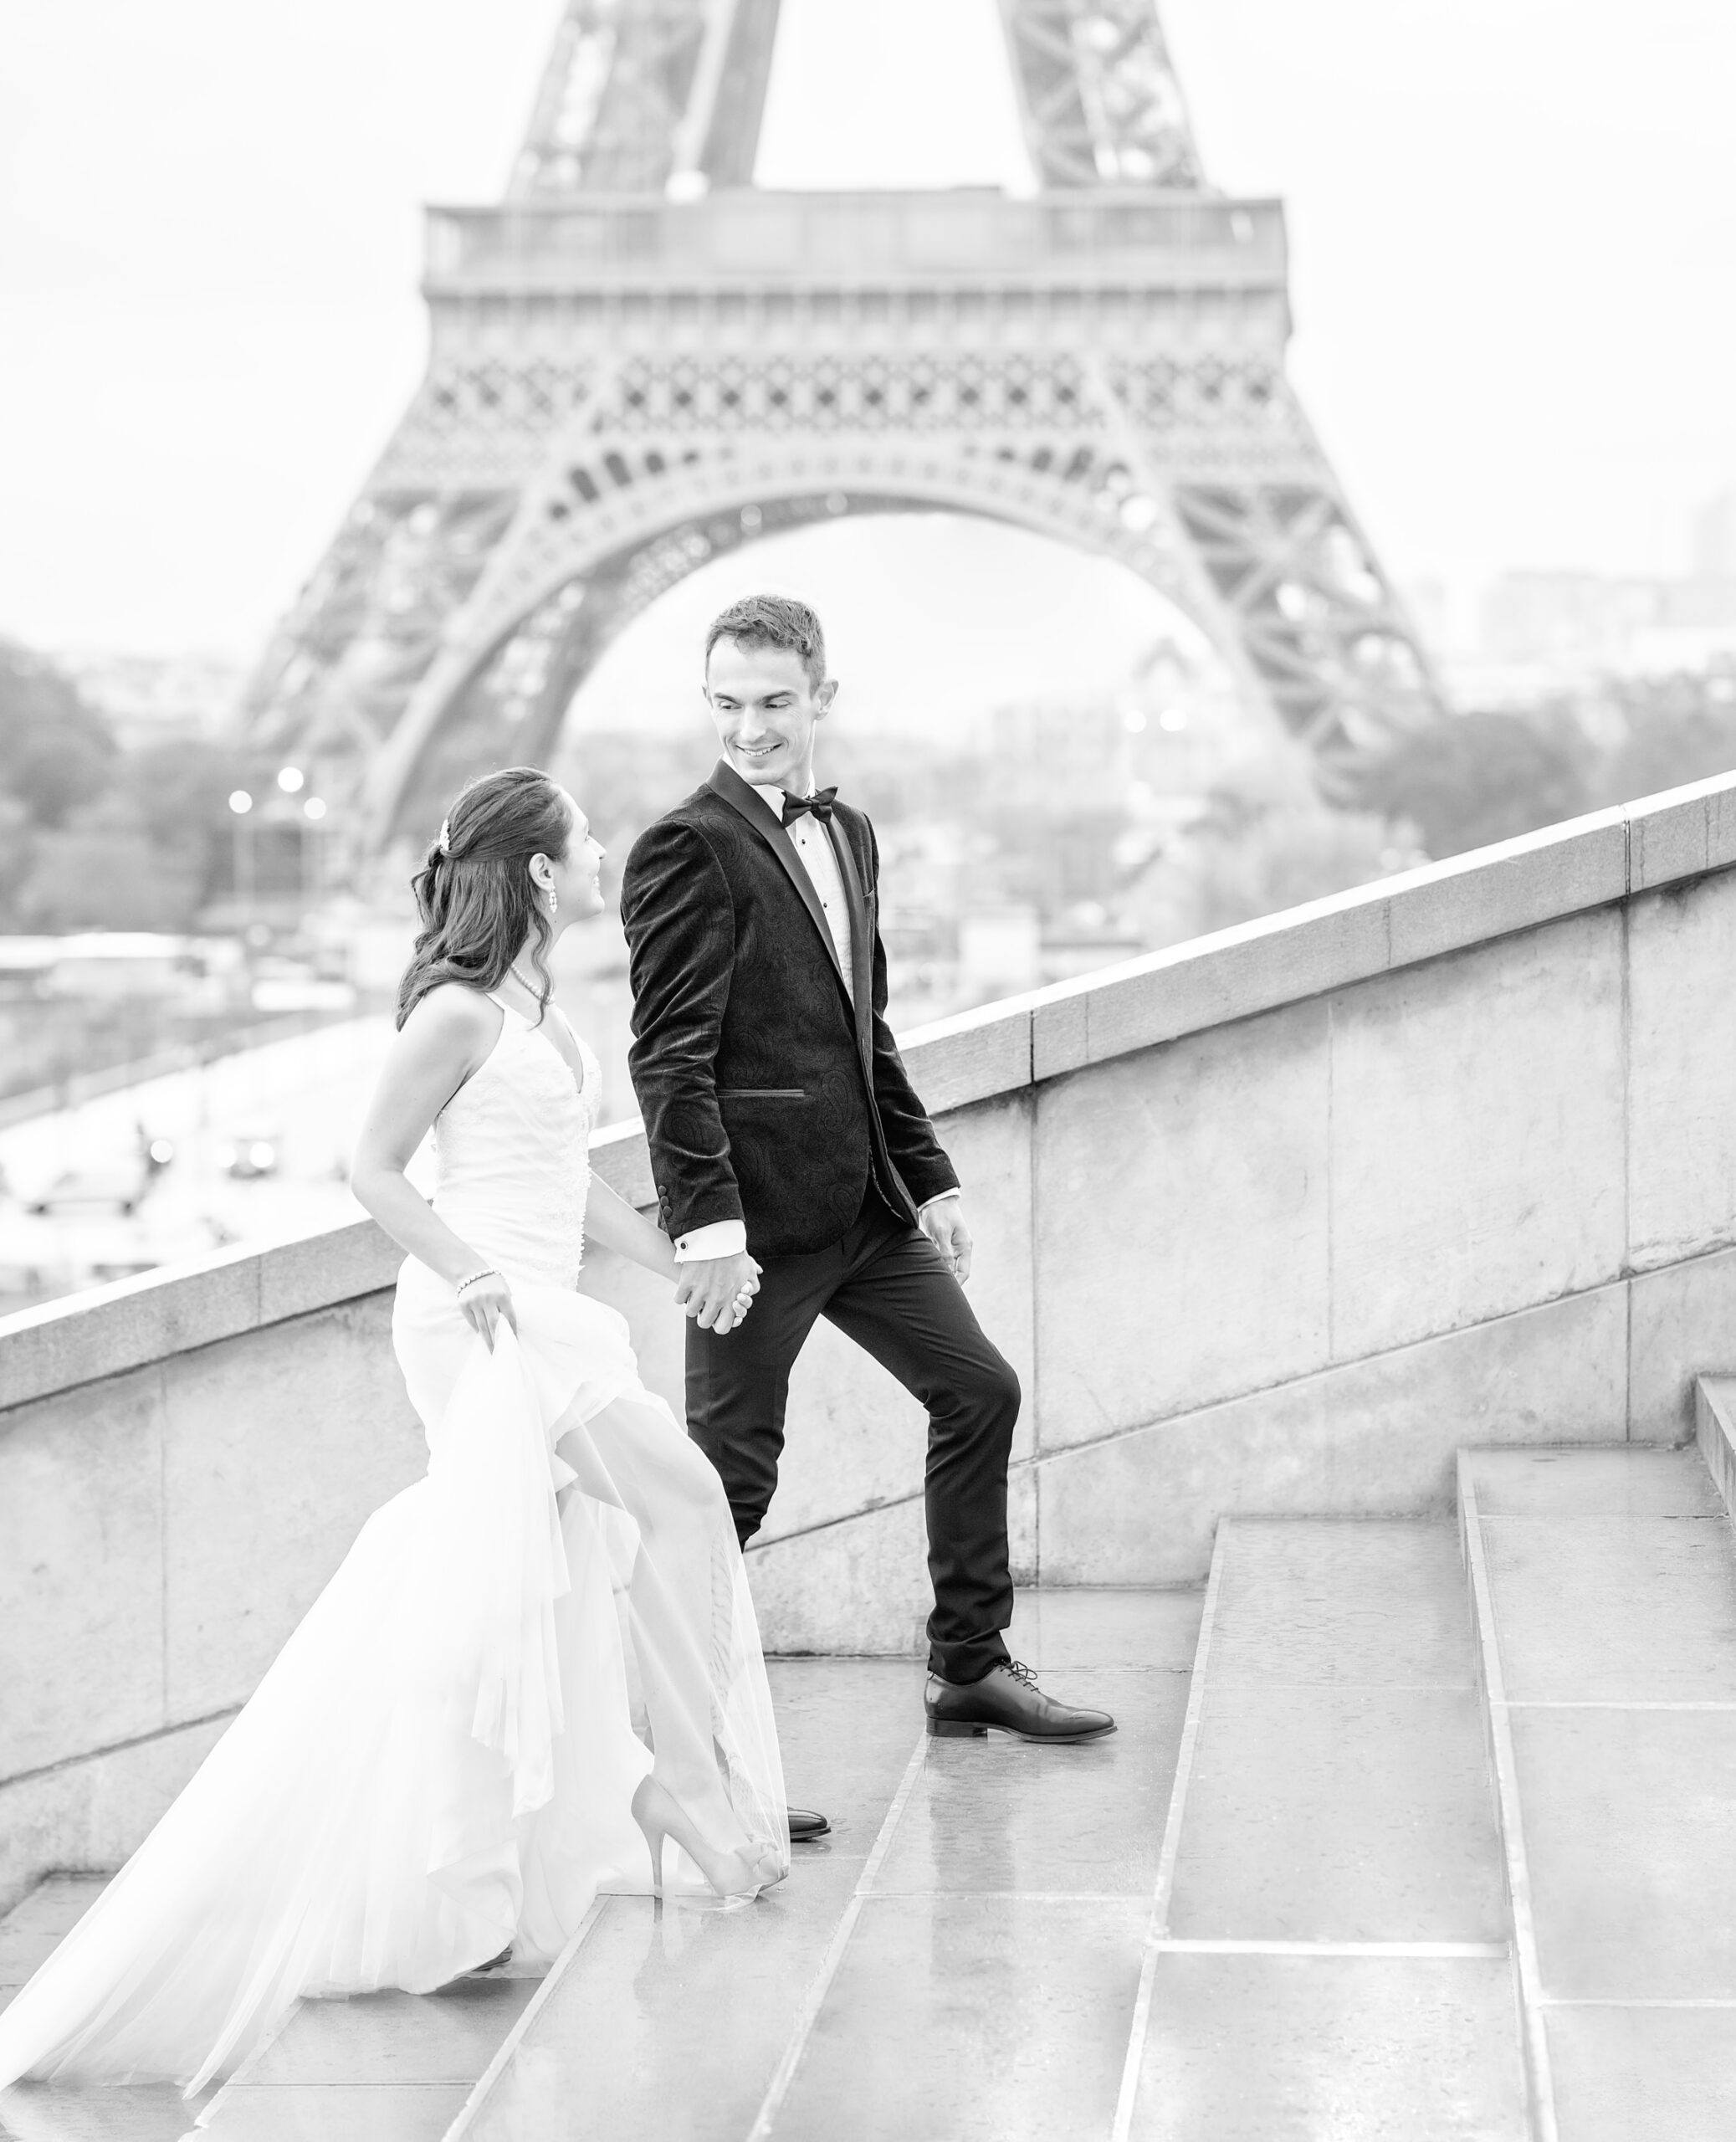 Bride and groom walking up the steps in front of the Eiffel Tower